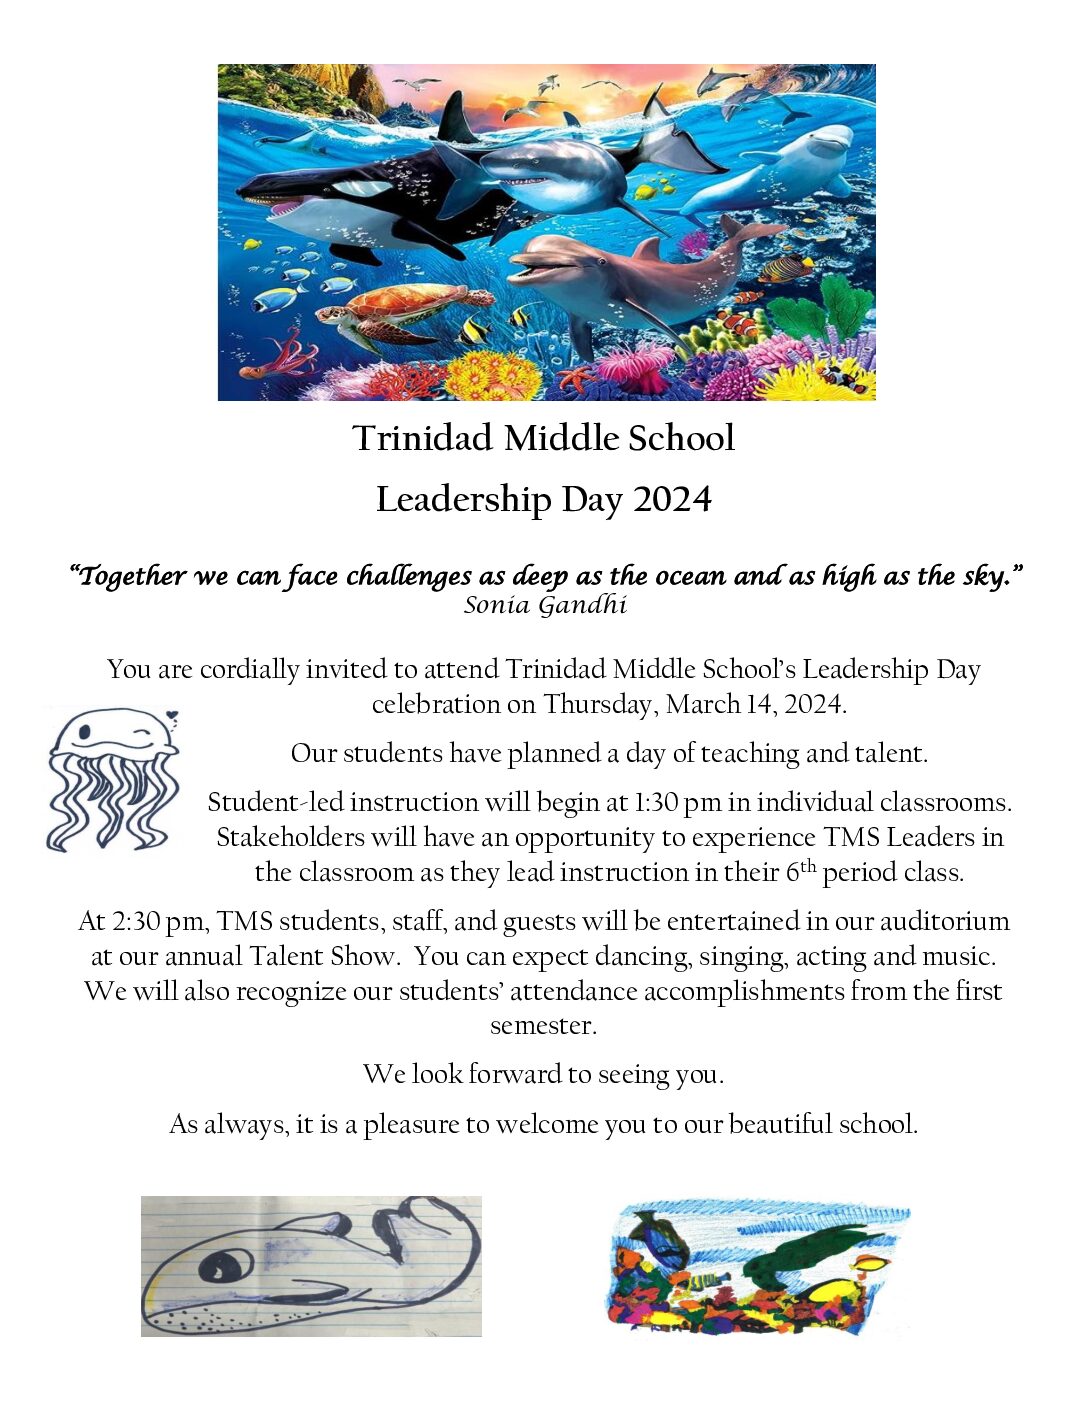 TMS Leadership Day 2024